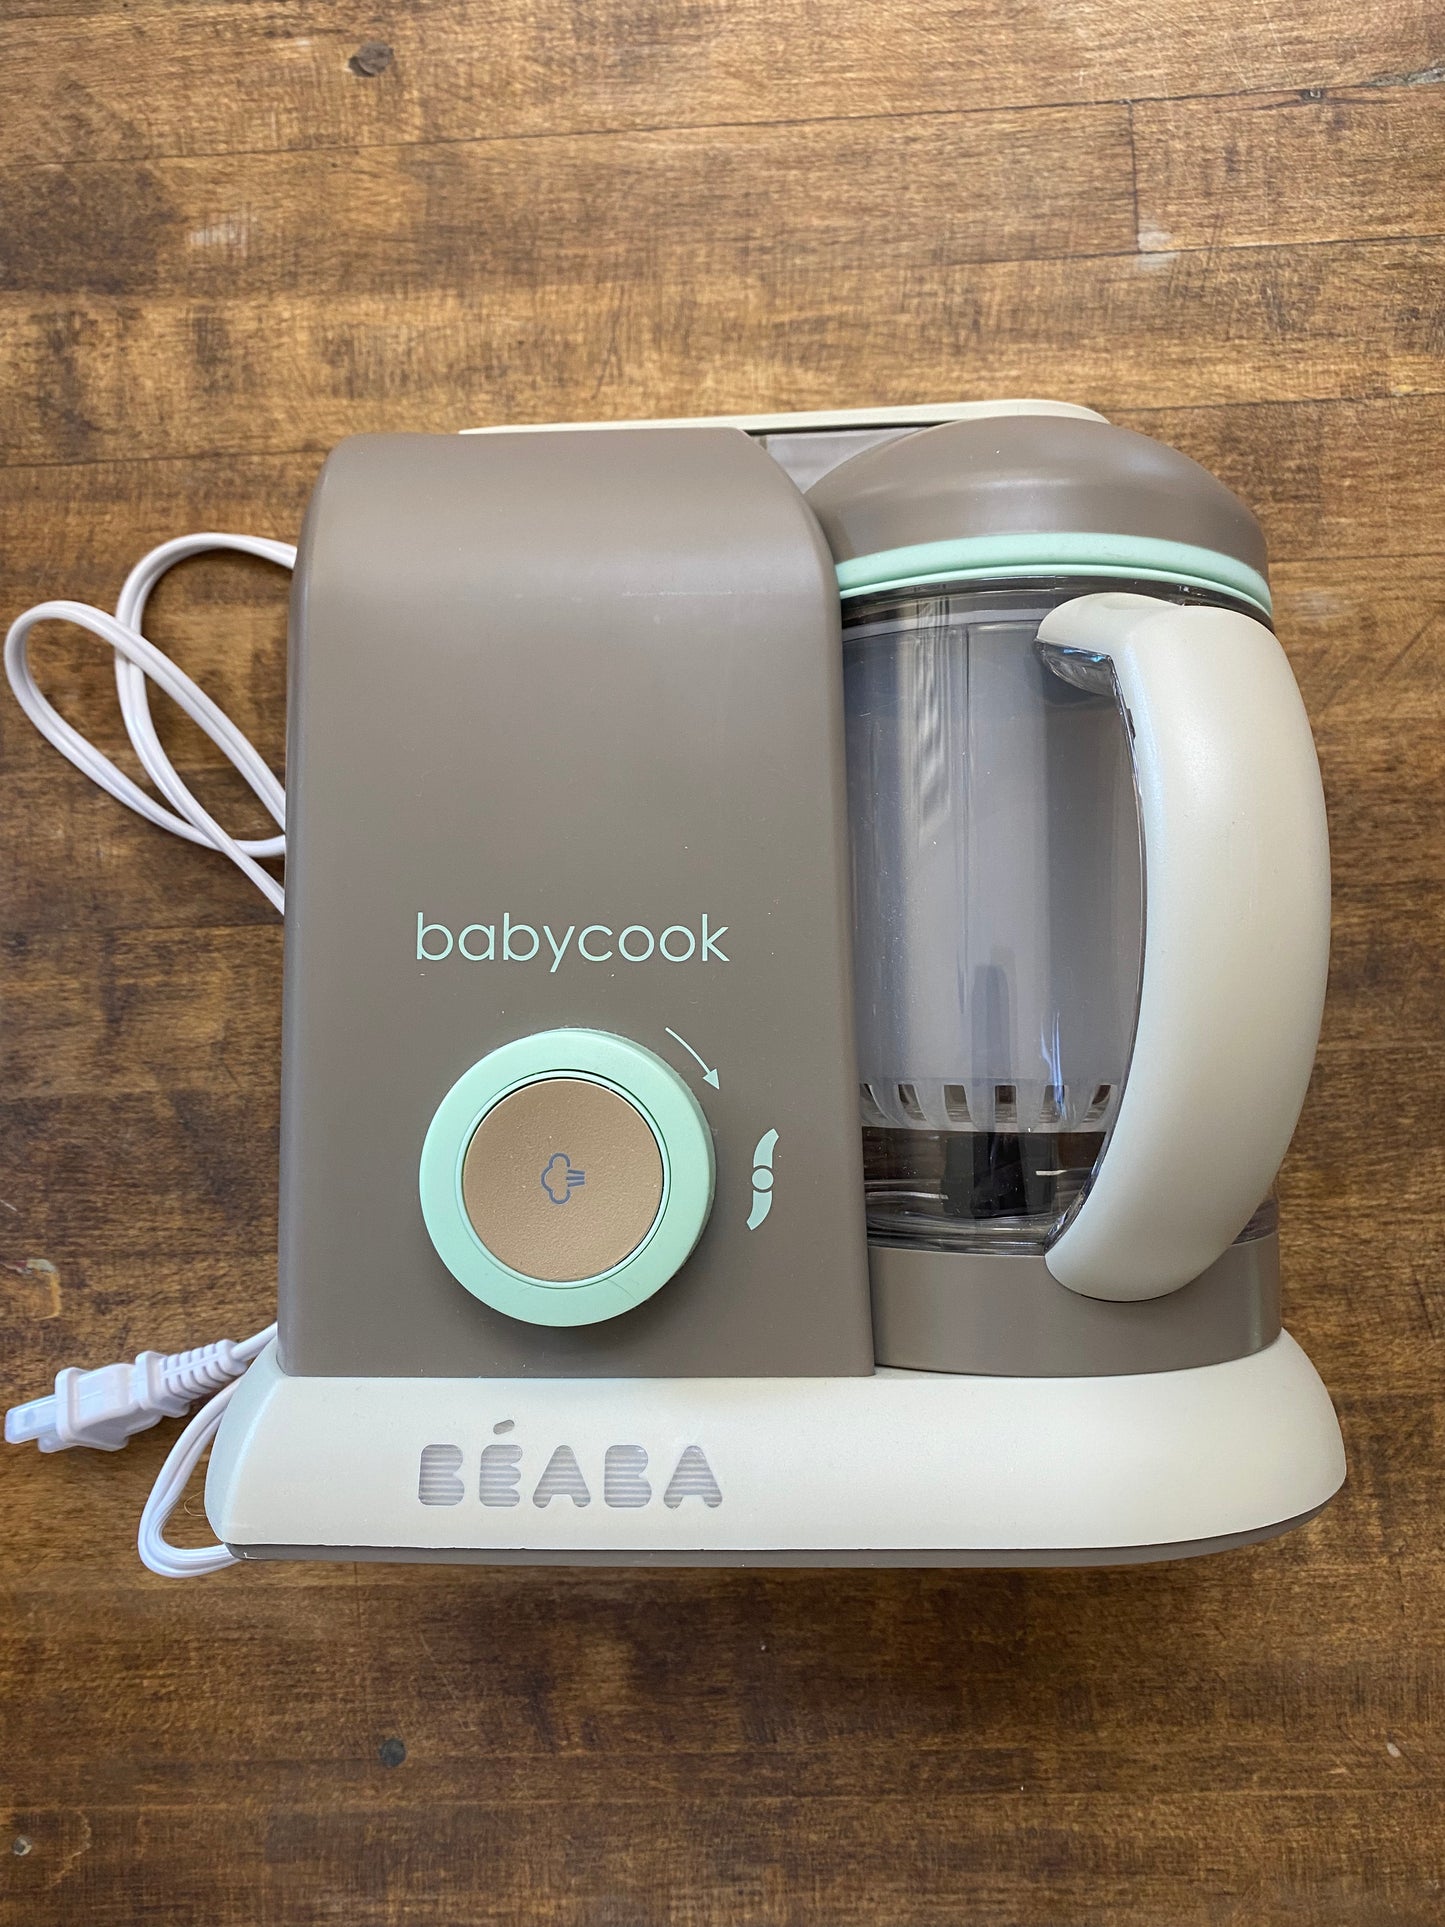 BEABA Babycook Solo 4 in 1 Baby Food Maker, Baby Food Processor, Steam Cook and Blender